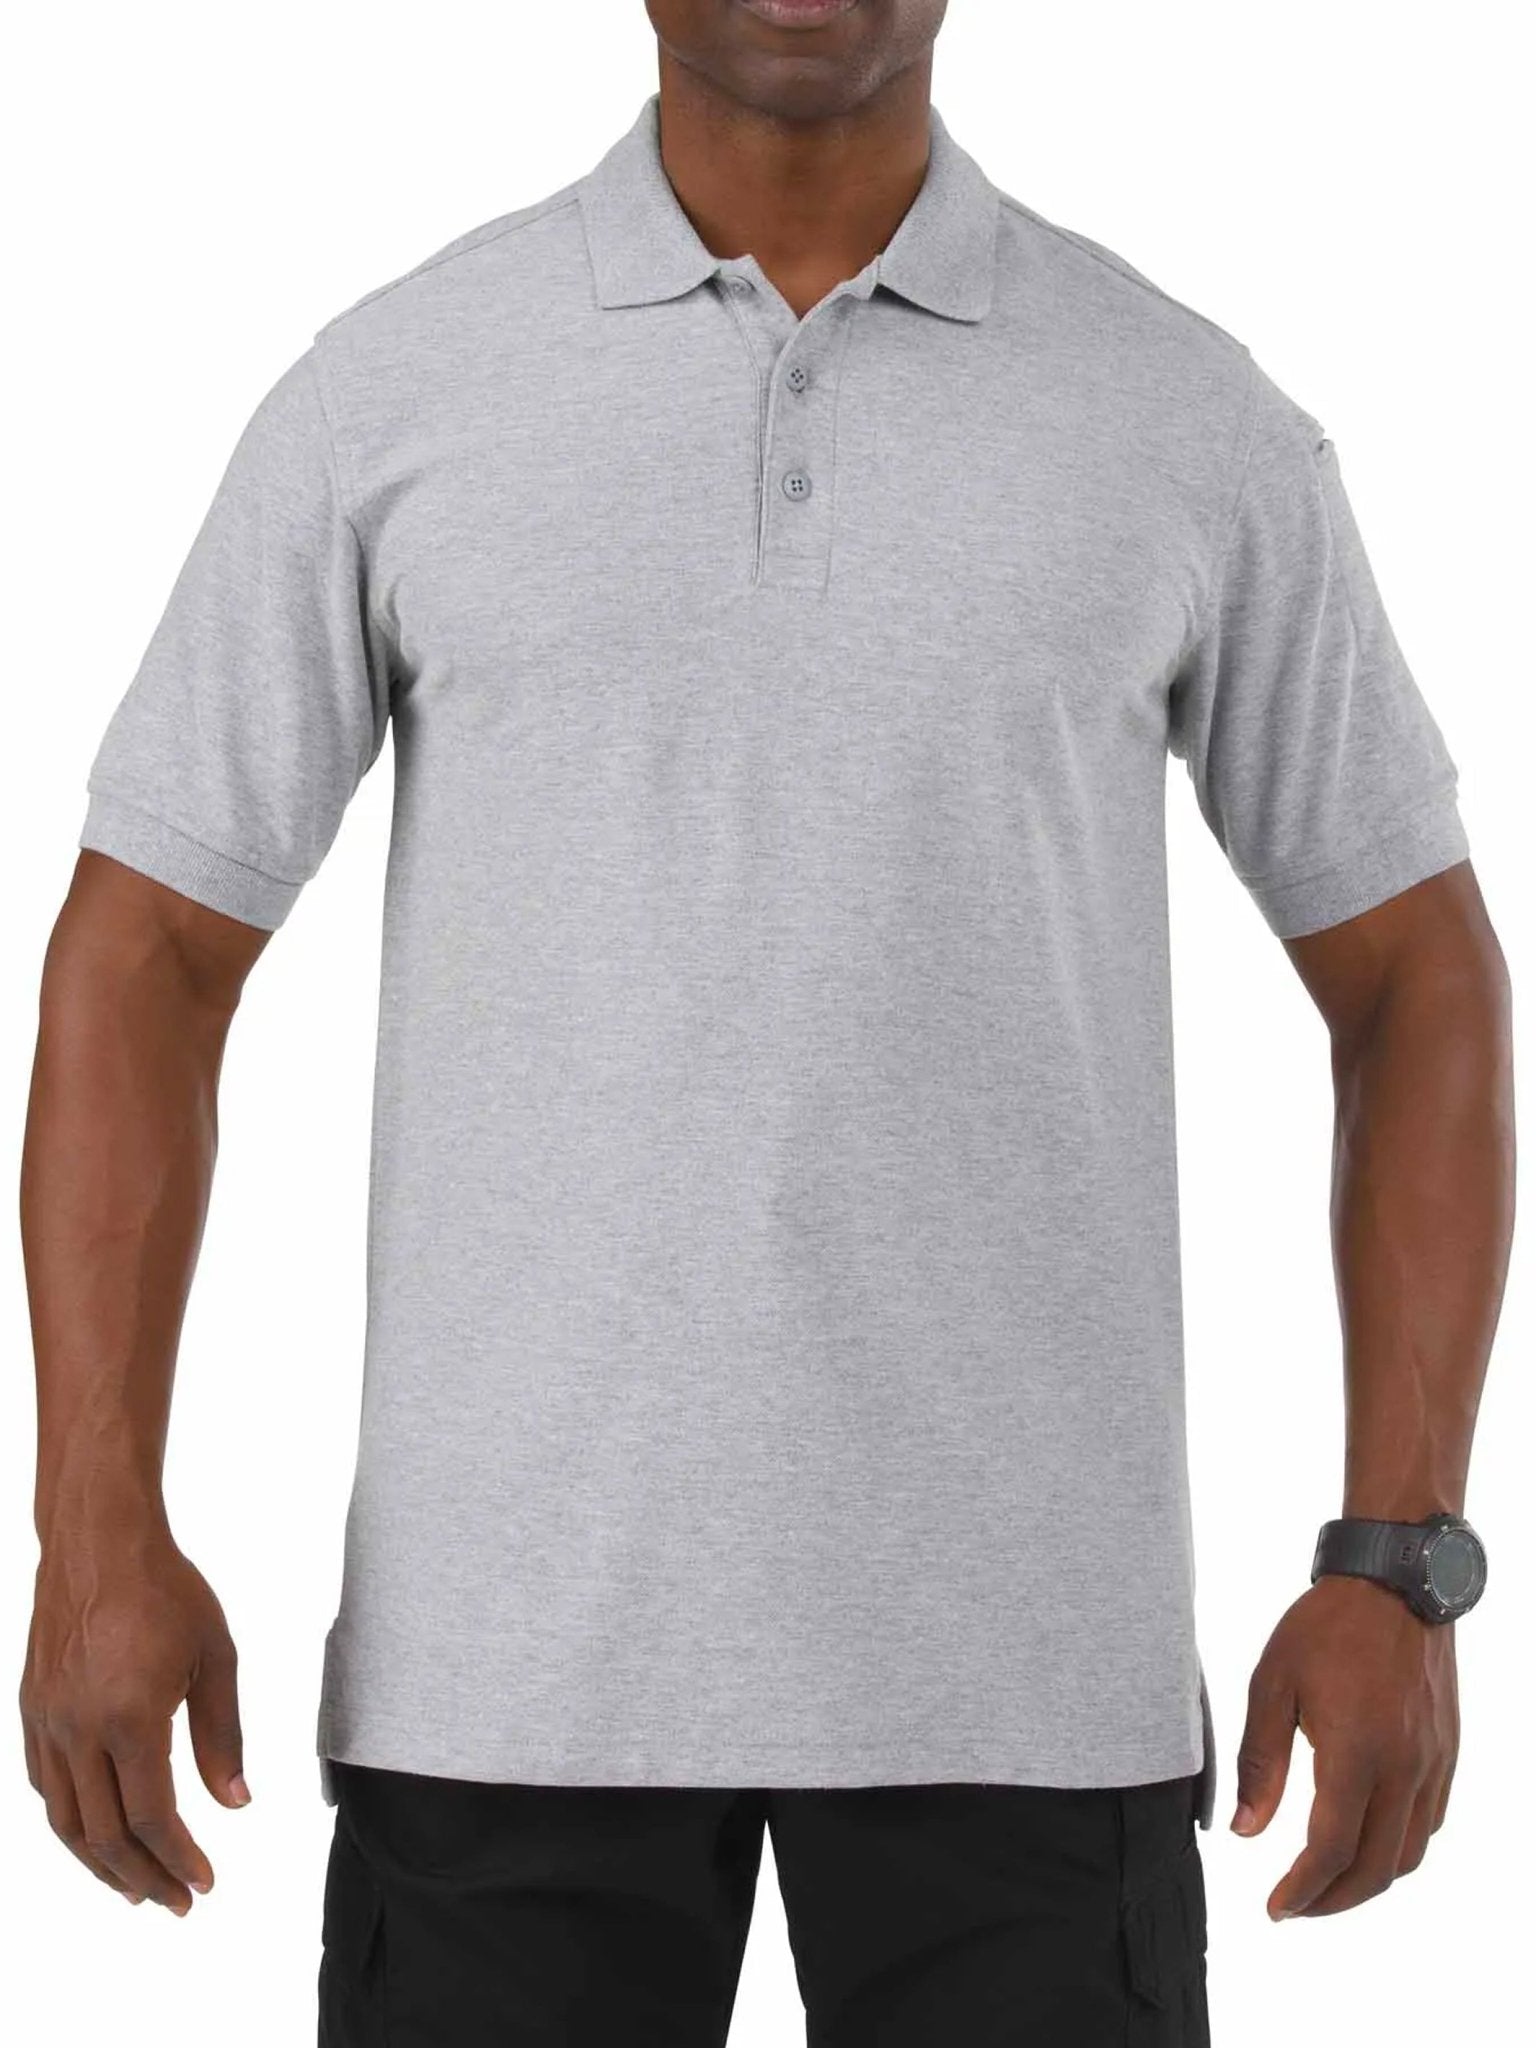 4elementsclothing5.11 Tactical5.11 Tactical - 5.11 Utility Short Sleeve Polo Shirt - Cotton / Polyester Pique - Style 41180T-Shirt41180-016-XS